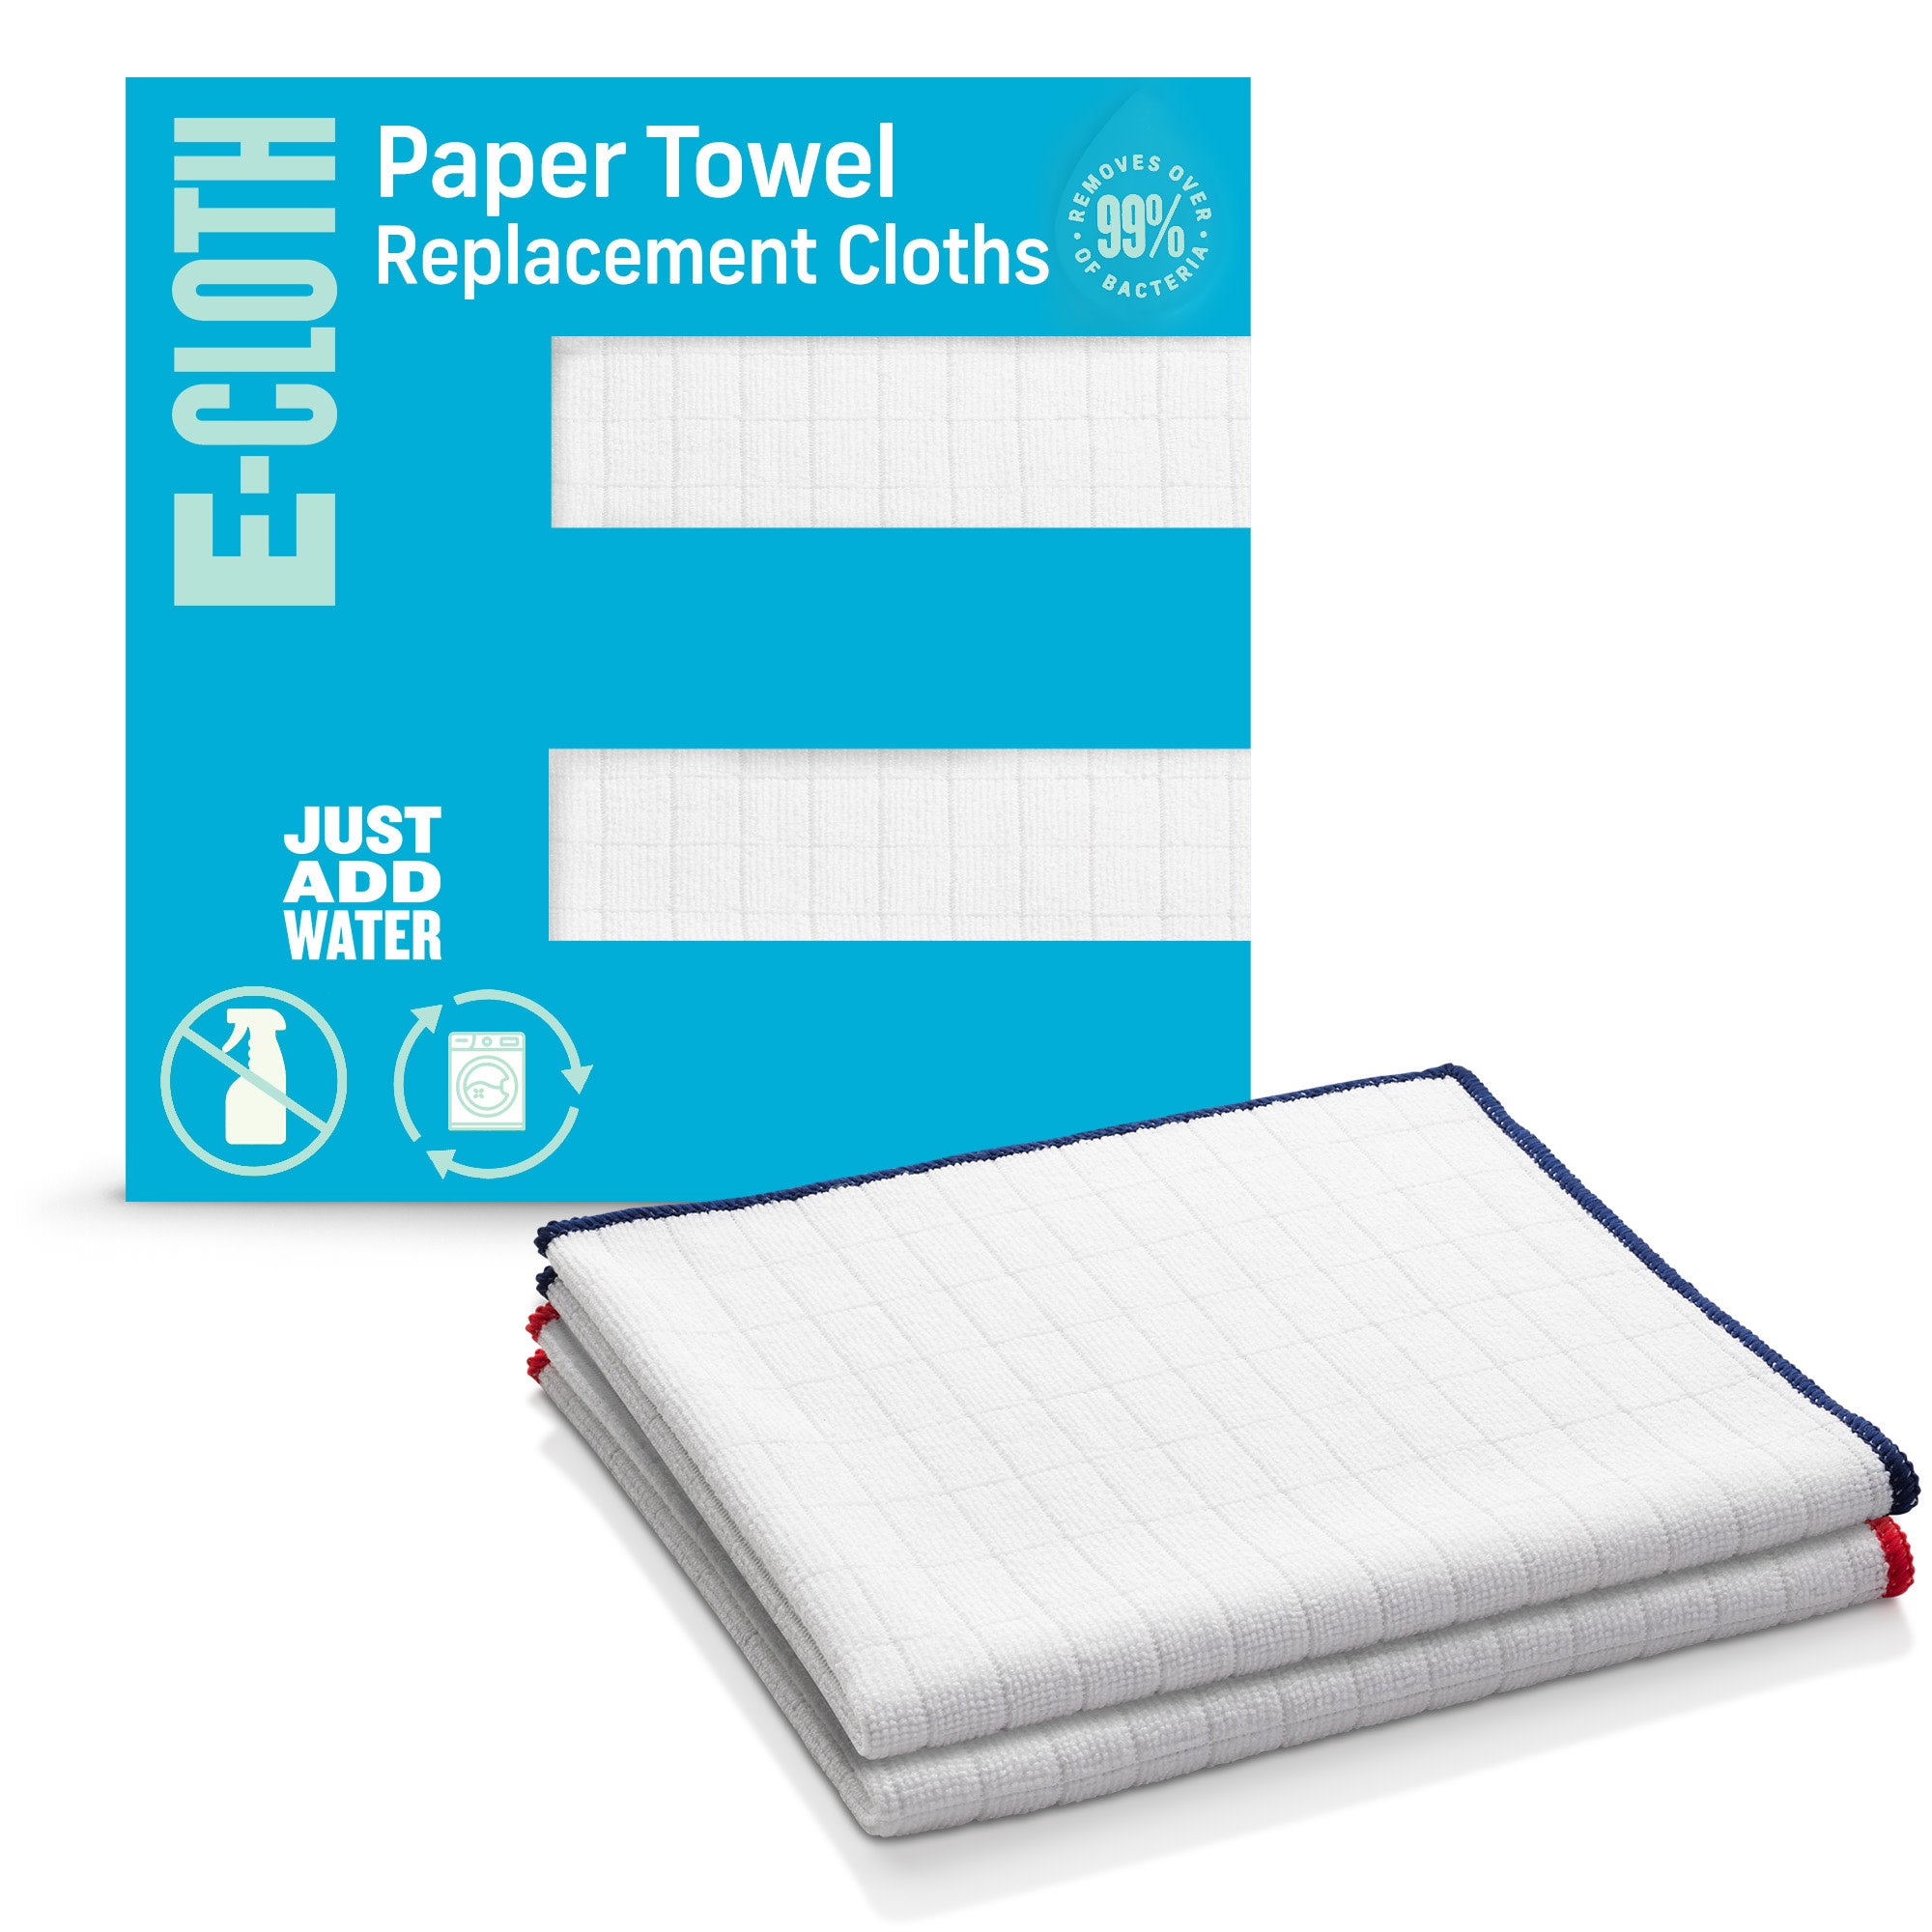 Image of Reusable Paper Towel Replacement Cloths : Paper Towel Replacement Cloths o4919 